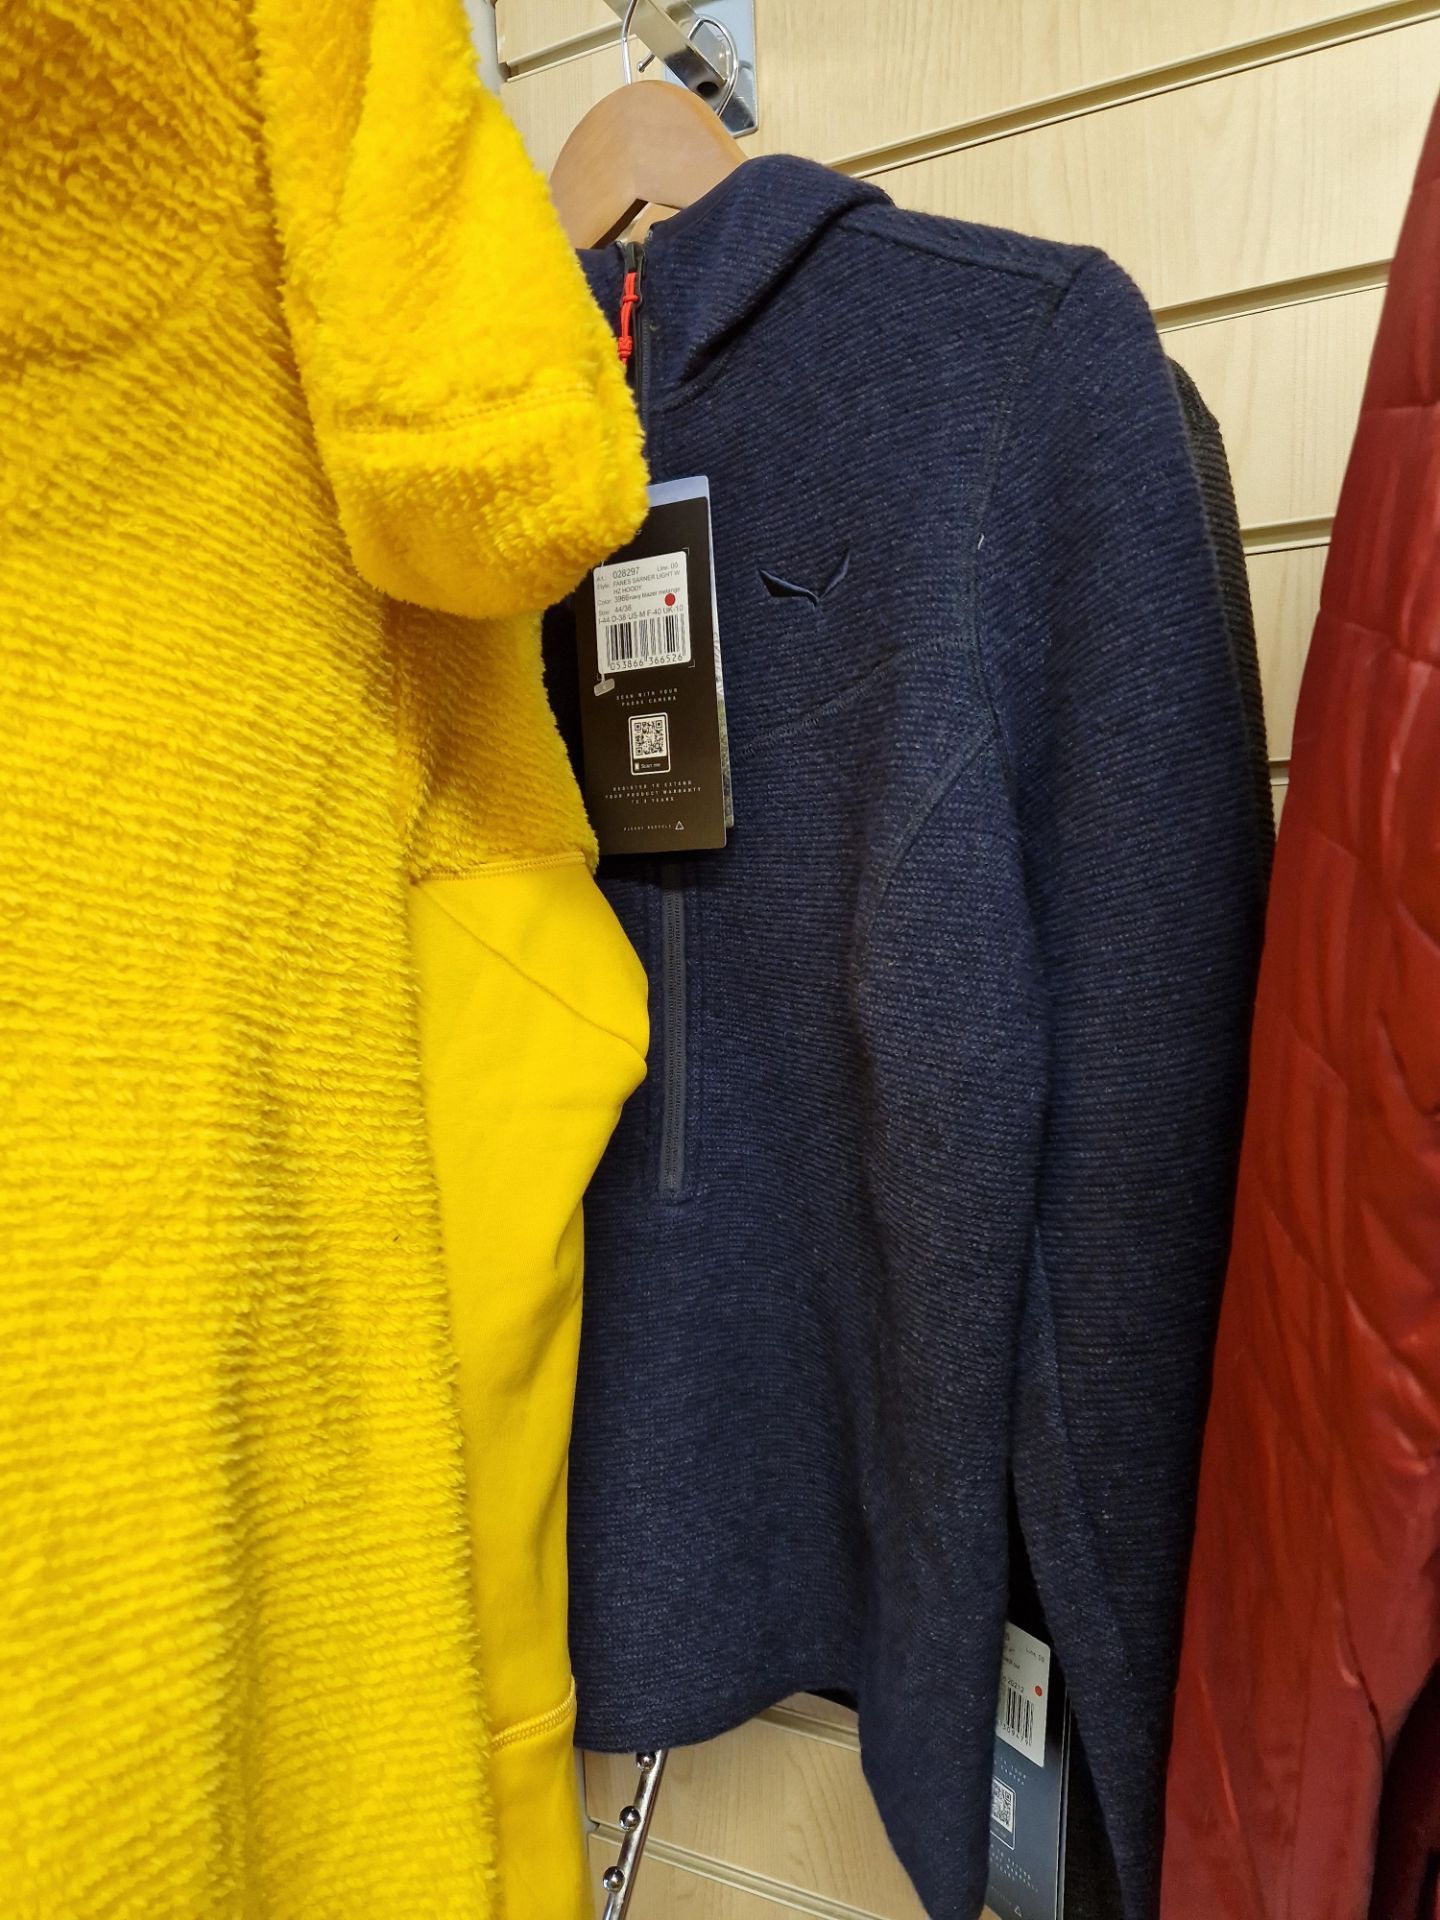 Salewa Tognazza / Fedaia / Fanes / Rolle Jackets and Hoodies, Colour: Gold / Rhodo Red / Navy / - Image 5 of 6